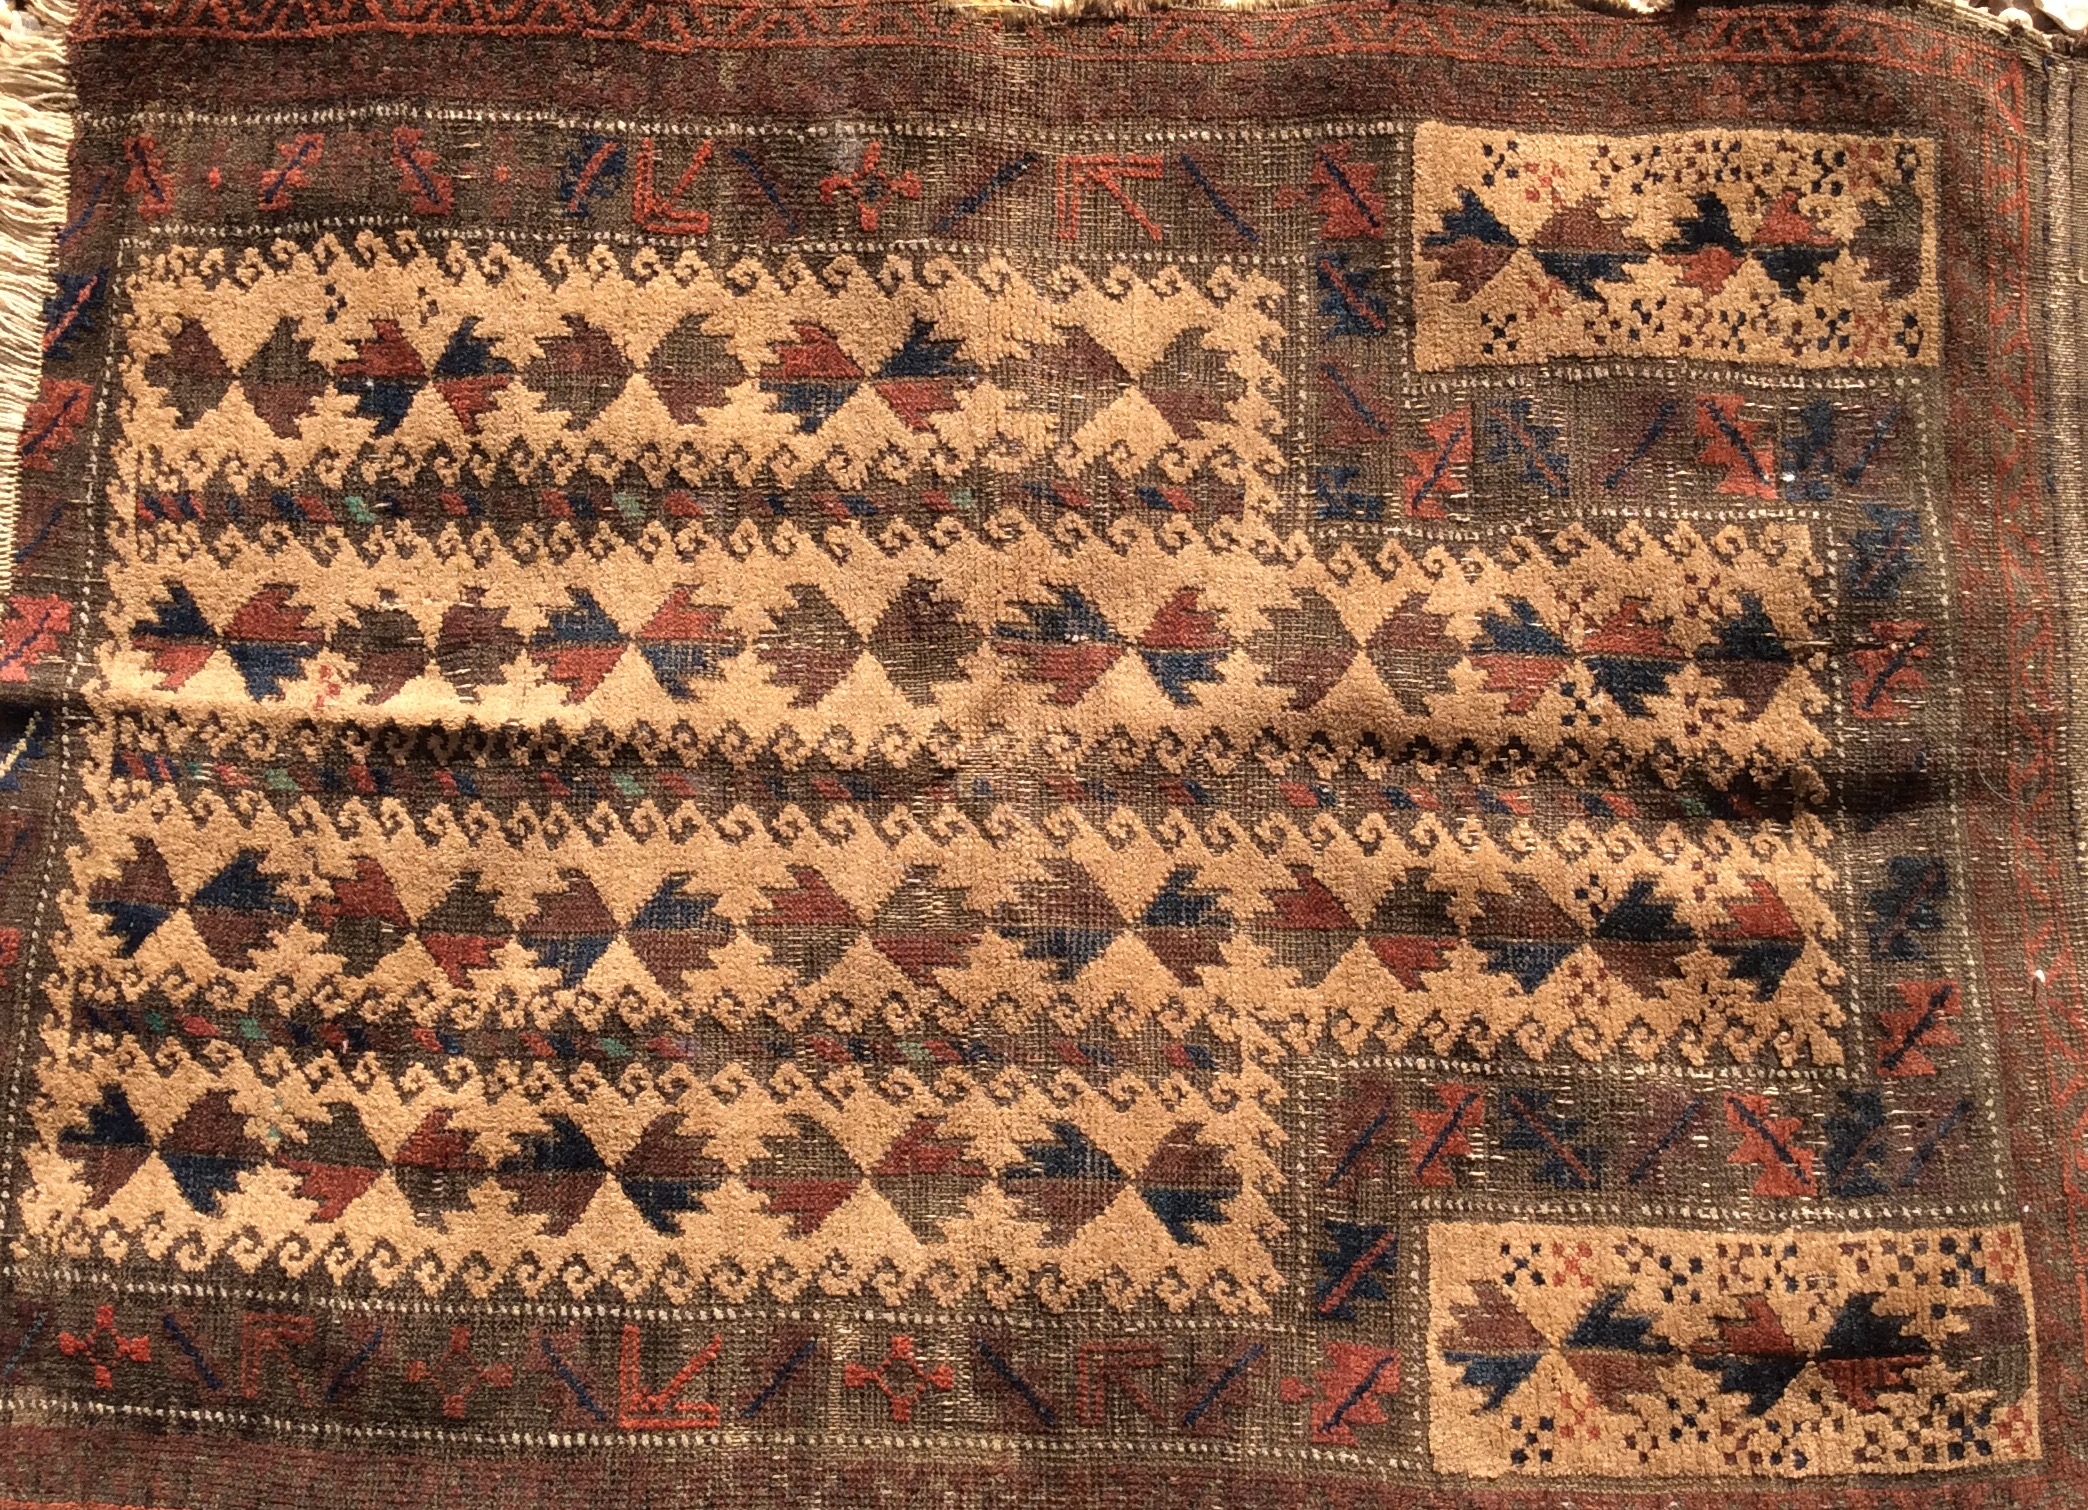 FOUR ANTIQUE PERSIAN RUGS To include one having a red field, with a geometric design and a black - Image 4 of 4